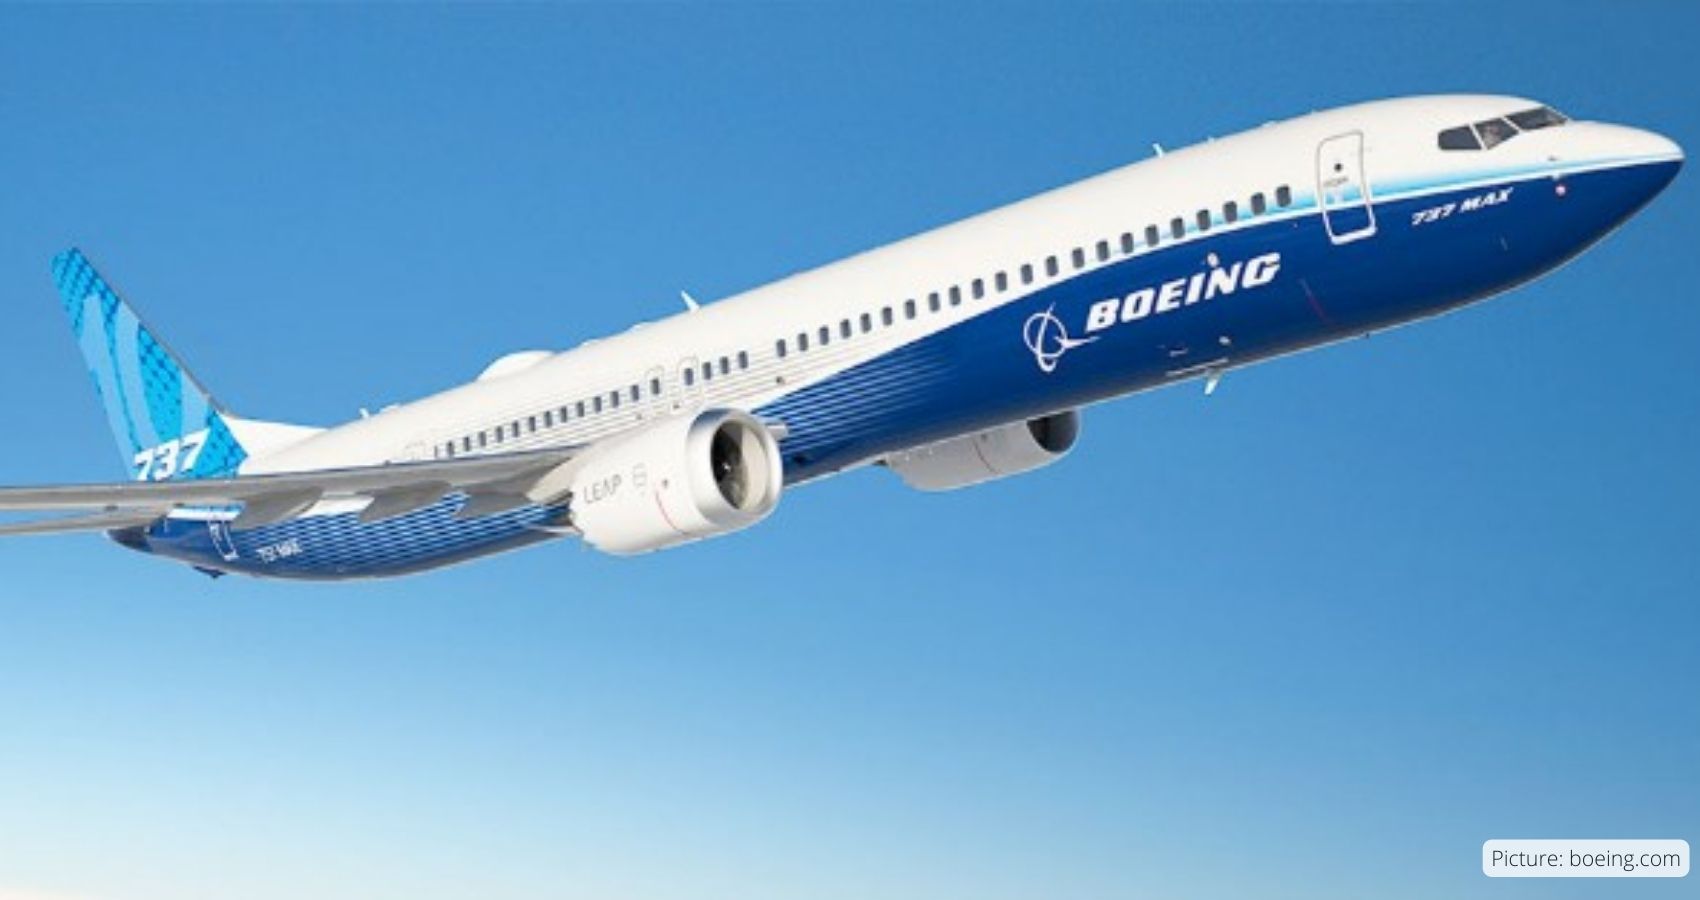 Feature and Cover Boeing’s Precarious Plunge From Industry Titan to Turbulent Troubles